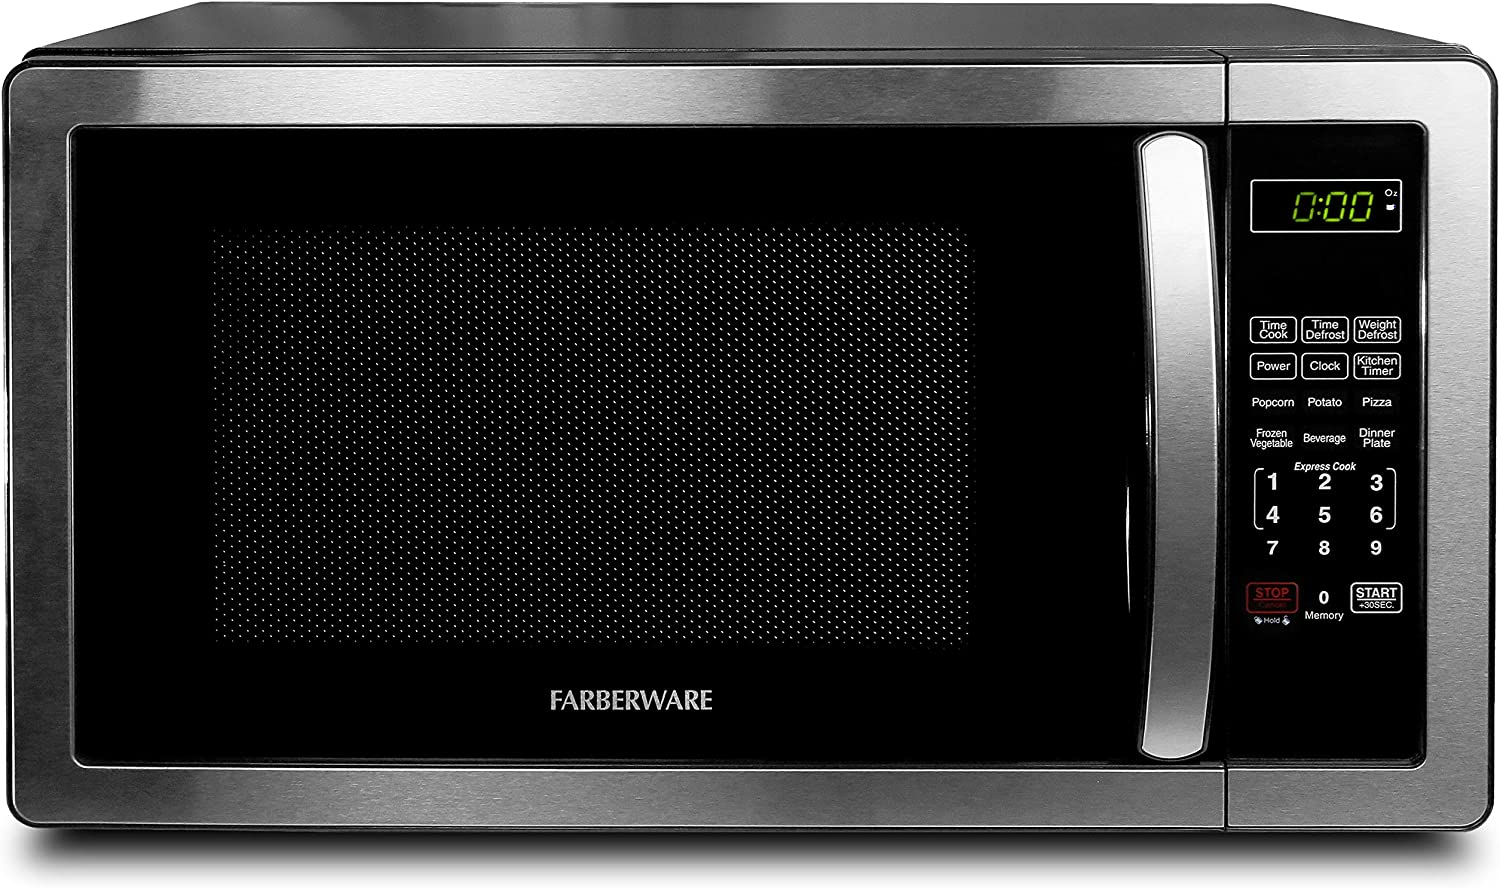 https://discounttoday.net/wp-content/uploads/2022/09/Farberware-FMO11AHTBKB-Countertop-Microwave-1.1-Cu.-Ft.-1000-Watt-Compact-Microwave-Oven-with-LED-lighting-Child-lock-and-Easy-Clean-Interior-Stainless-Steel-Interior-Exterior.jpg